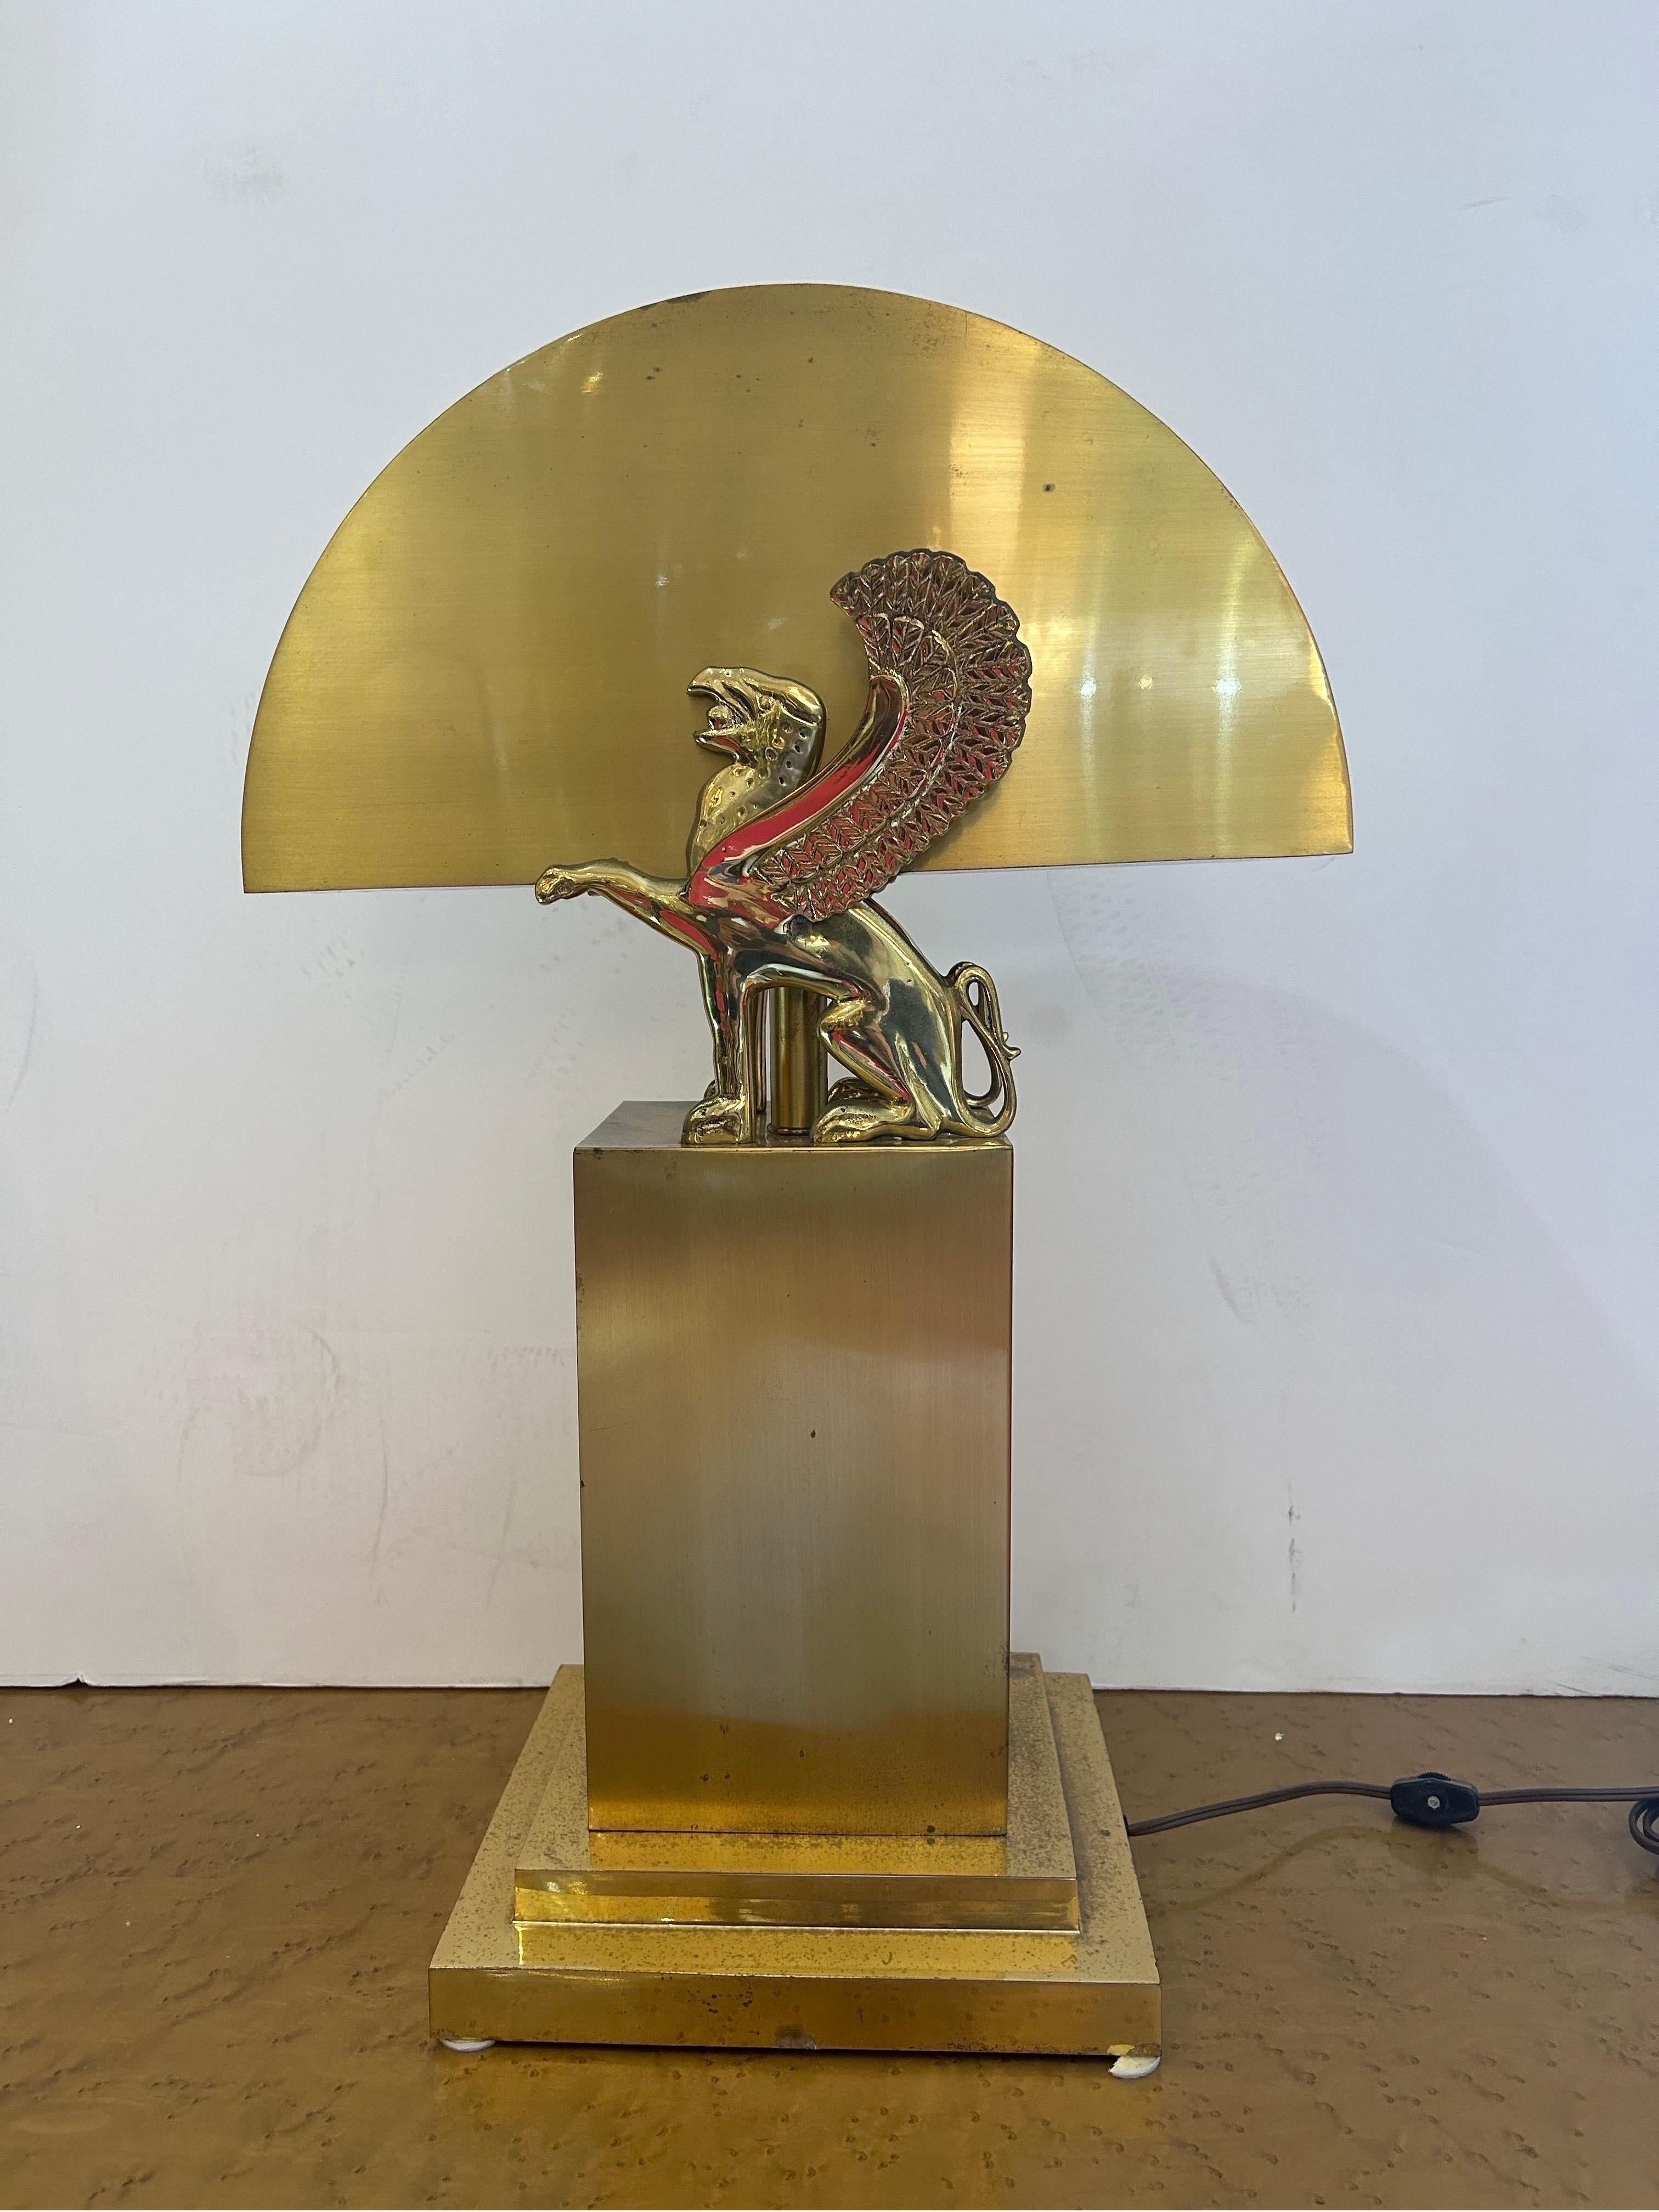 Gianni Versace style brass lamp with wind Griffin circa 1970s… In original condition with age appropriate wear… Lamp shows beautifully a high style lamp